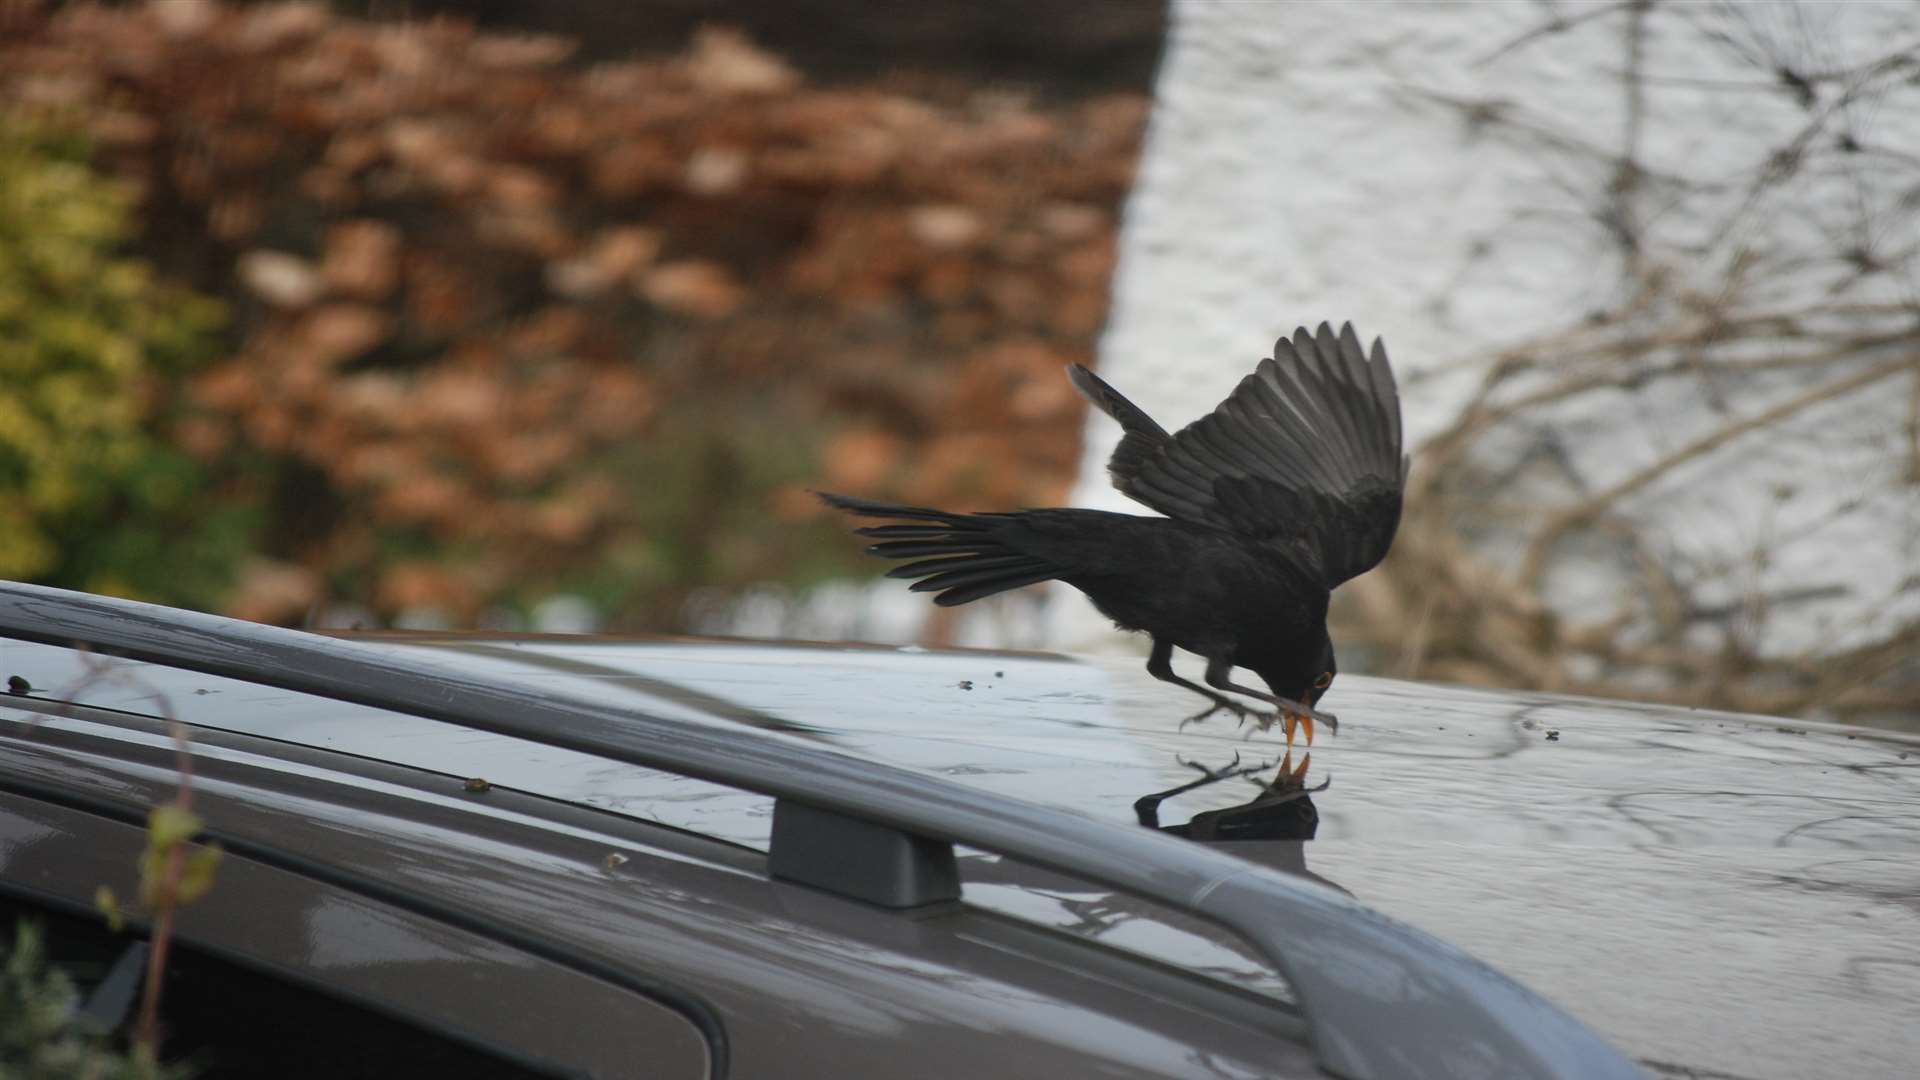 The male blackbird mistaking his reflection in a car roof for a love rival. Picture: Derrick Harris